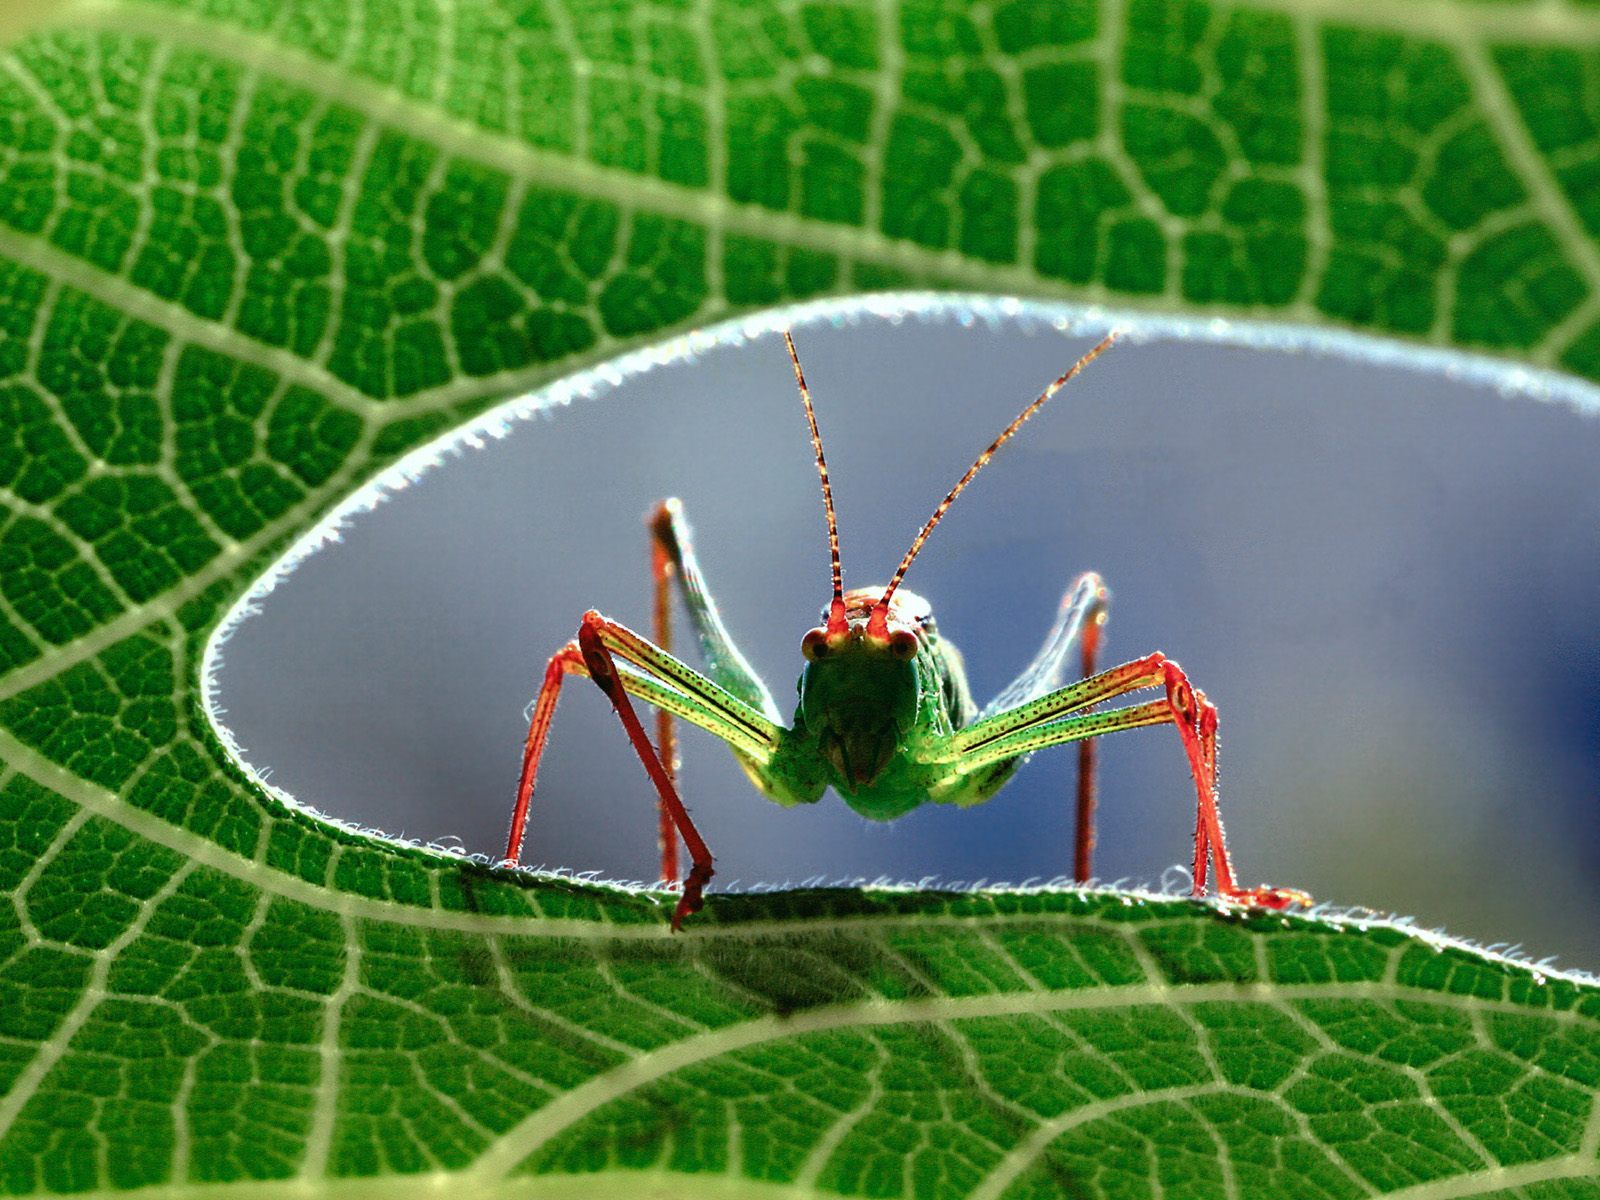 Download full size Insects wallpaper / Animals / 1600x1200